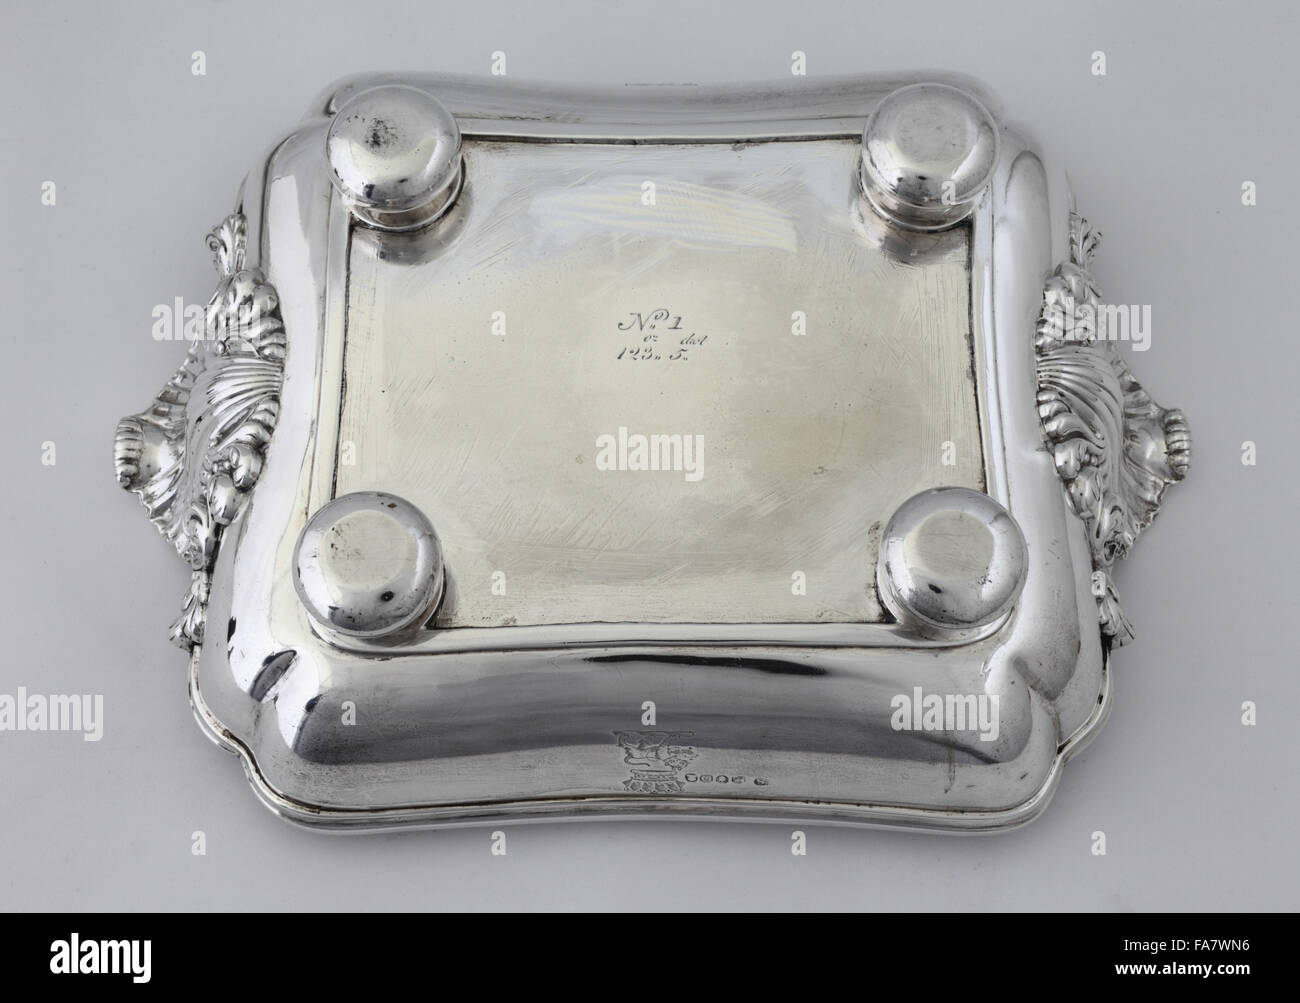 Underside of an entree dish by Paul Store, 1809, part of the silver collection at Ickworth, Suffolk. National Trust inventory number: 852103 Stock Photo